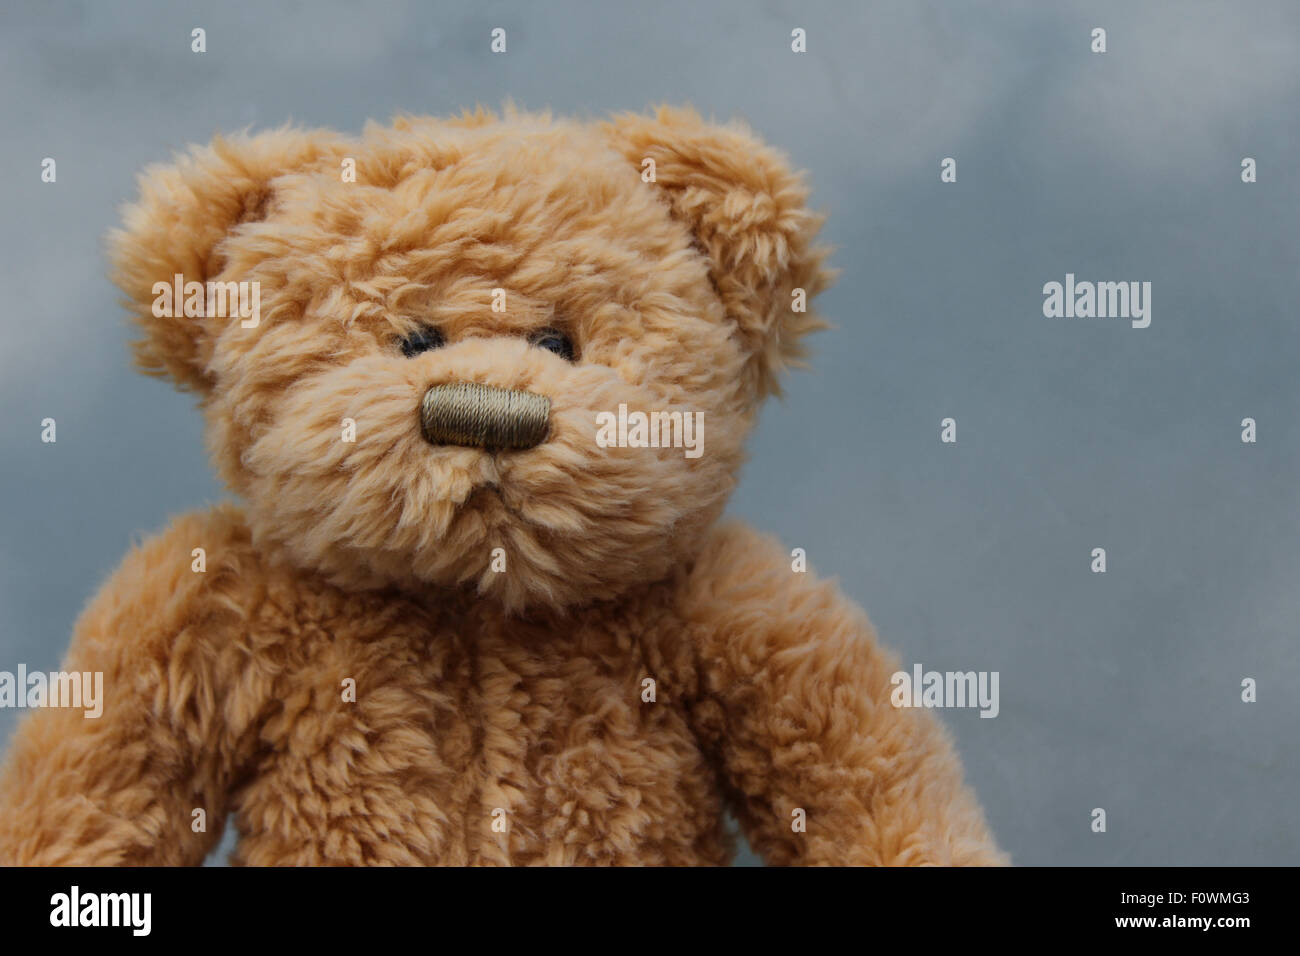 Golden Rustic Old Teddy Bear on grey background Stock Photo